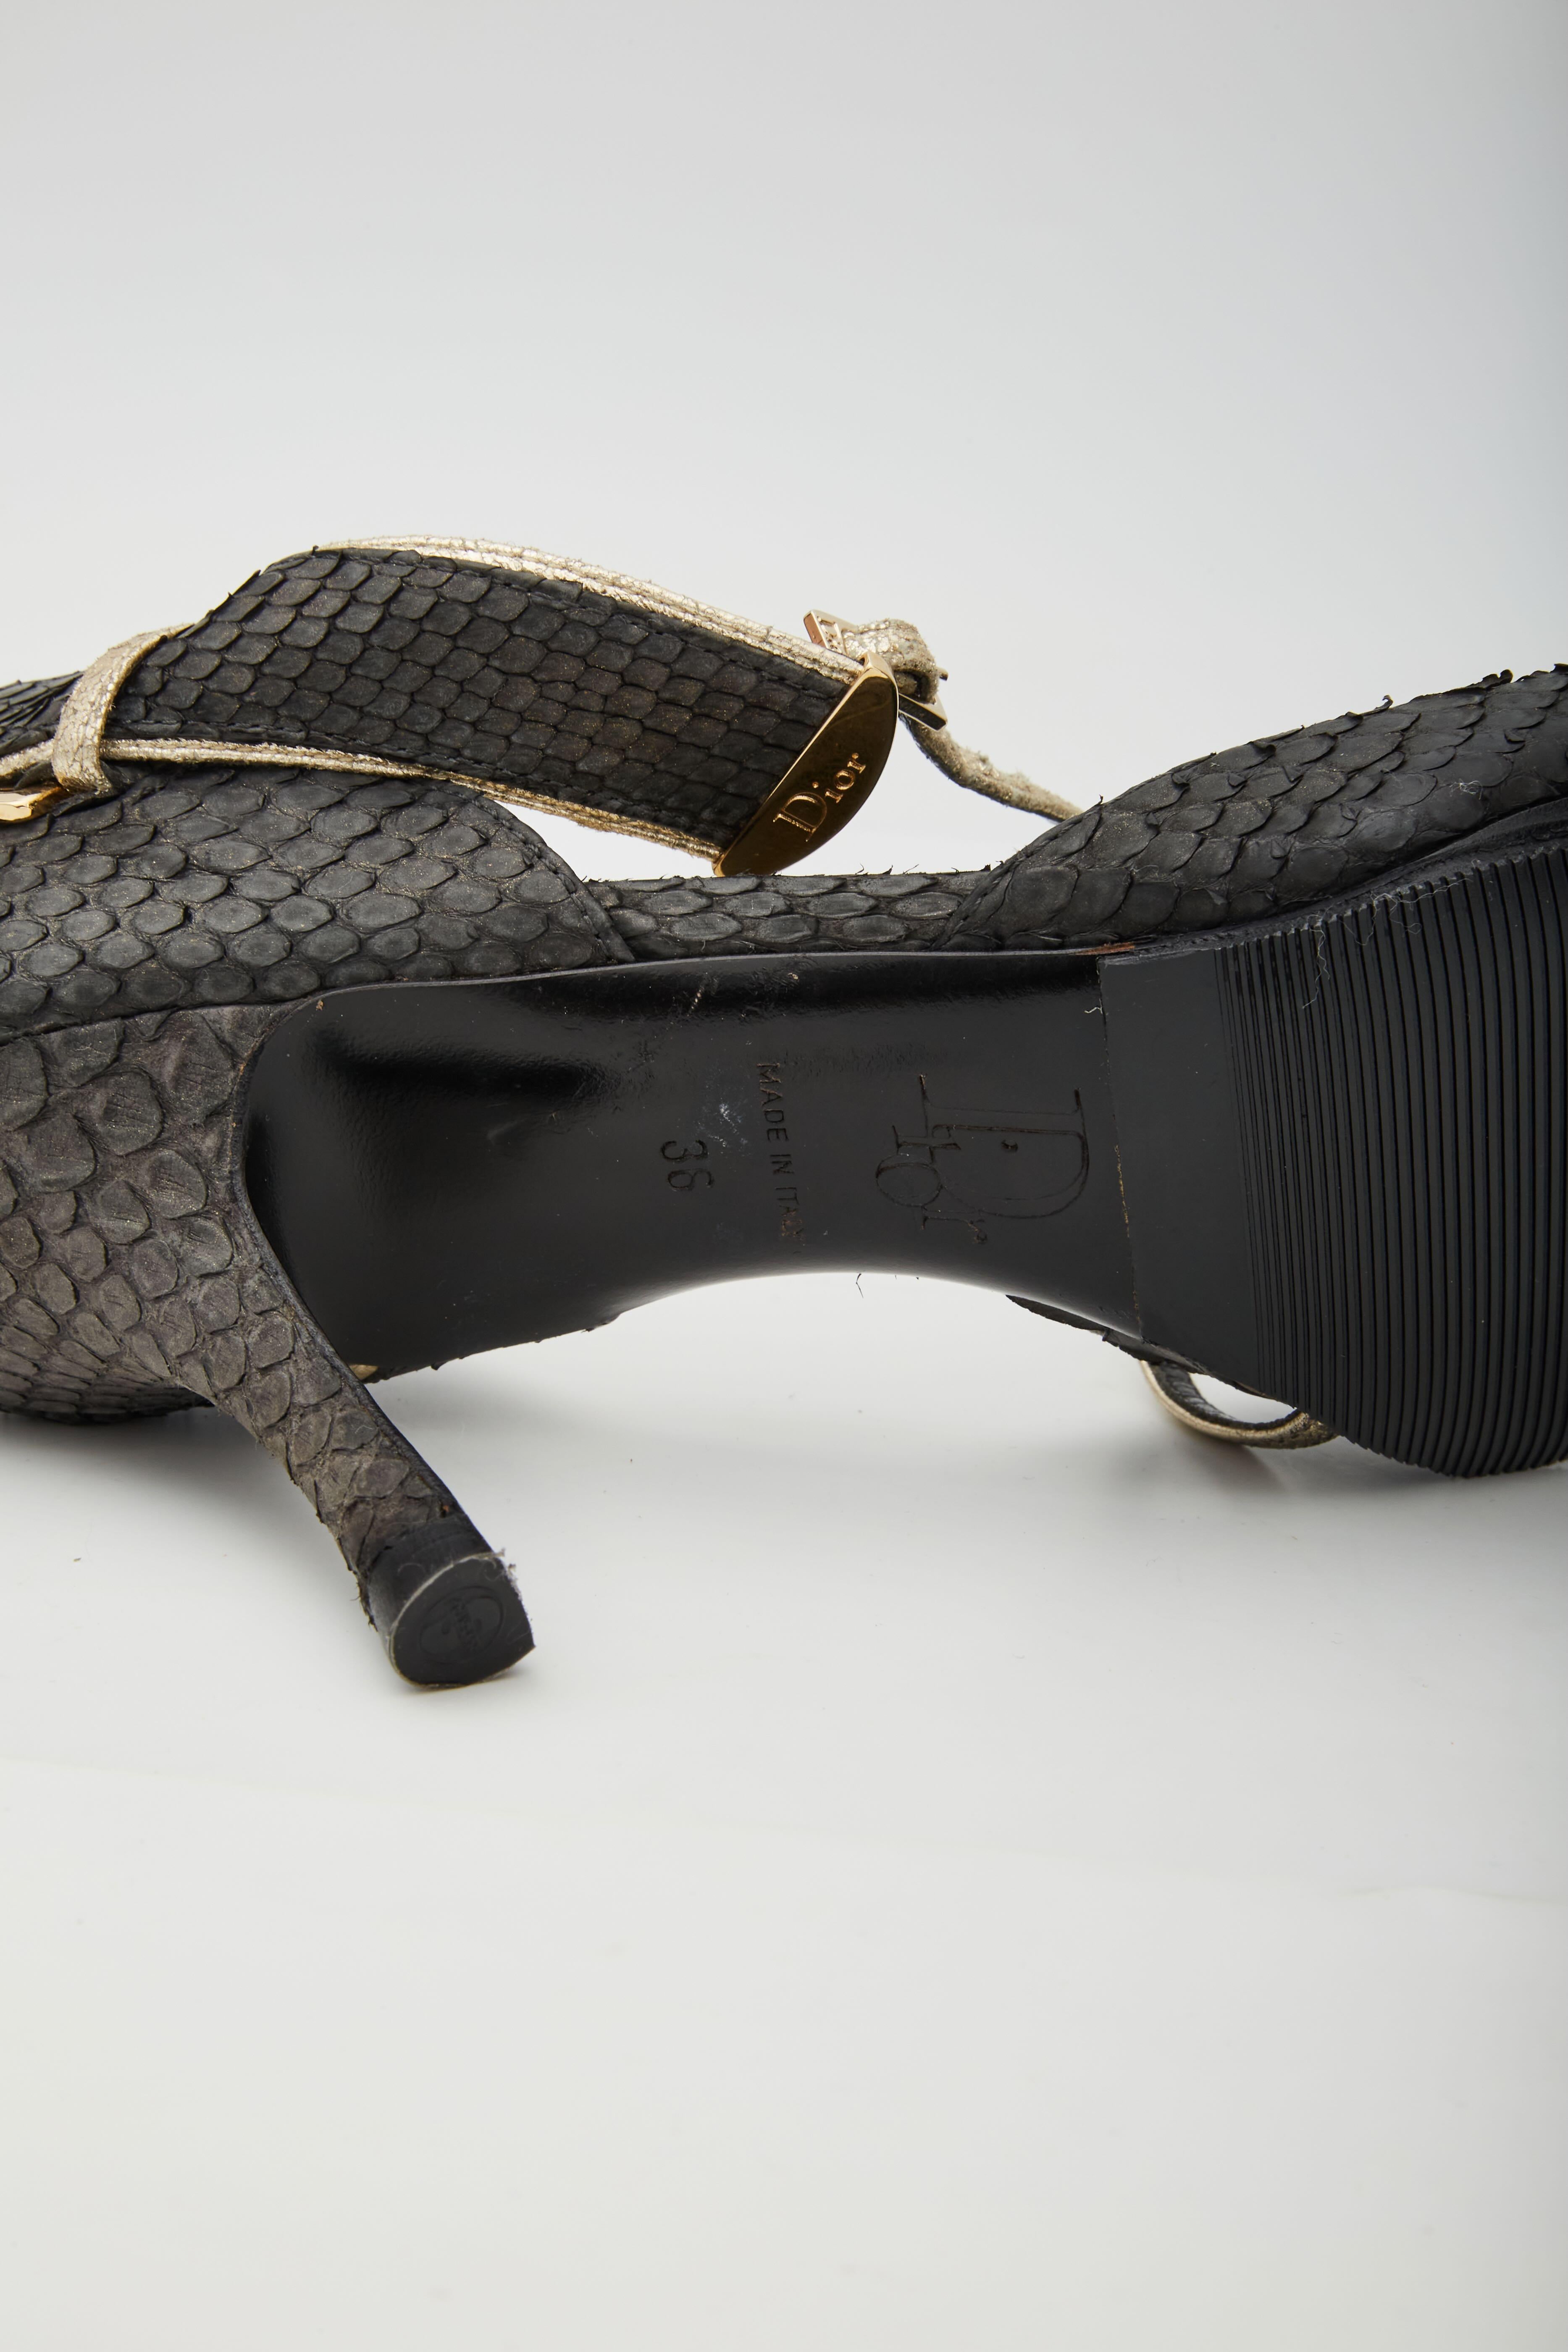 Dior Vintage Reptile Skin Black Bucked Pump (EU 36) In Excellent Condition For Sale In Montreal, Quebec